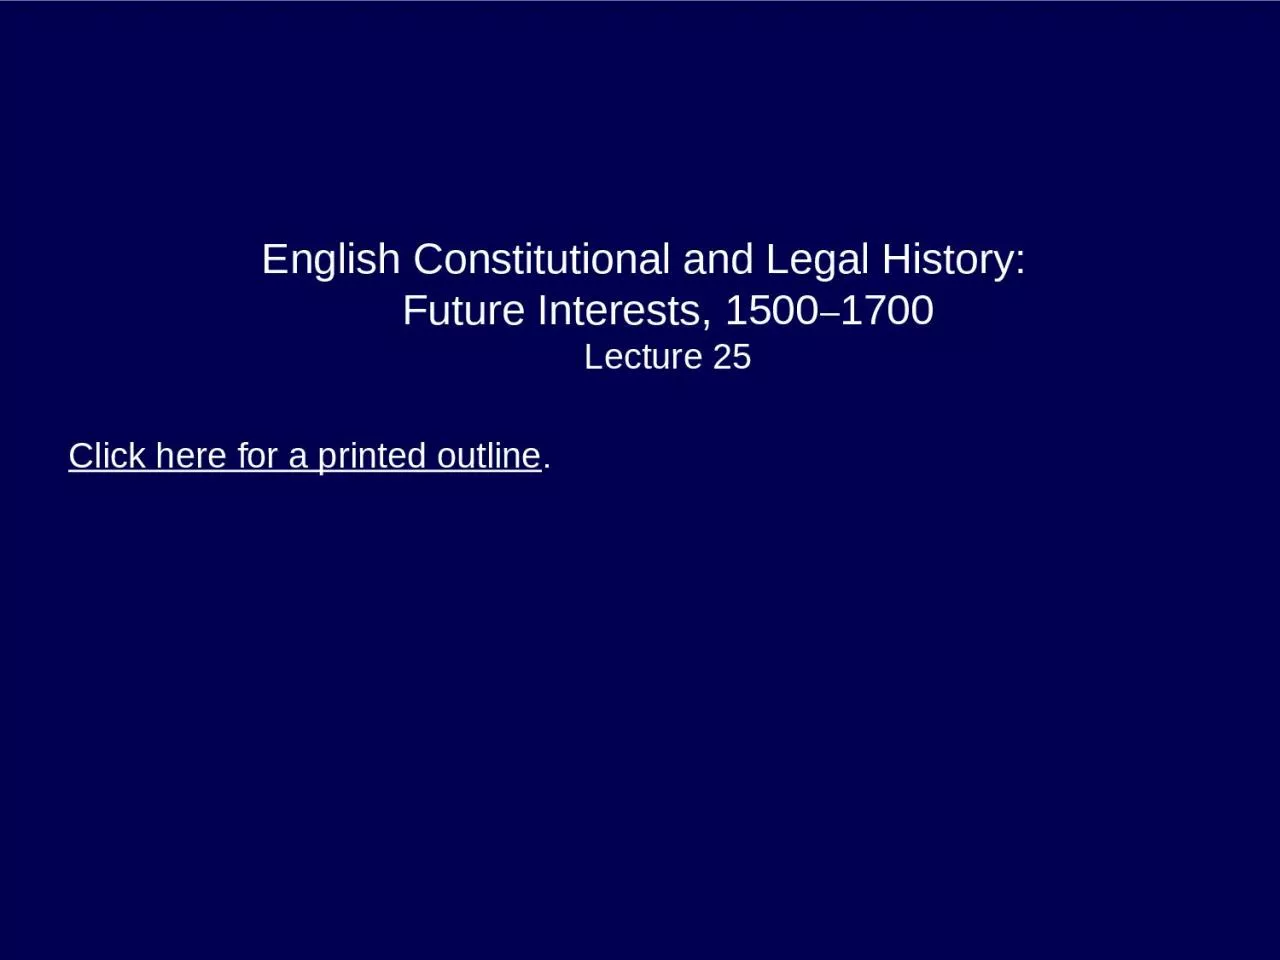 English Constitutional and Legal History: